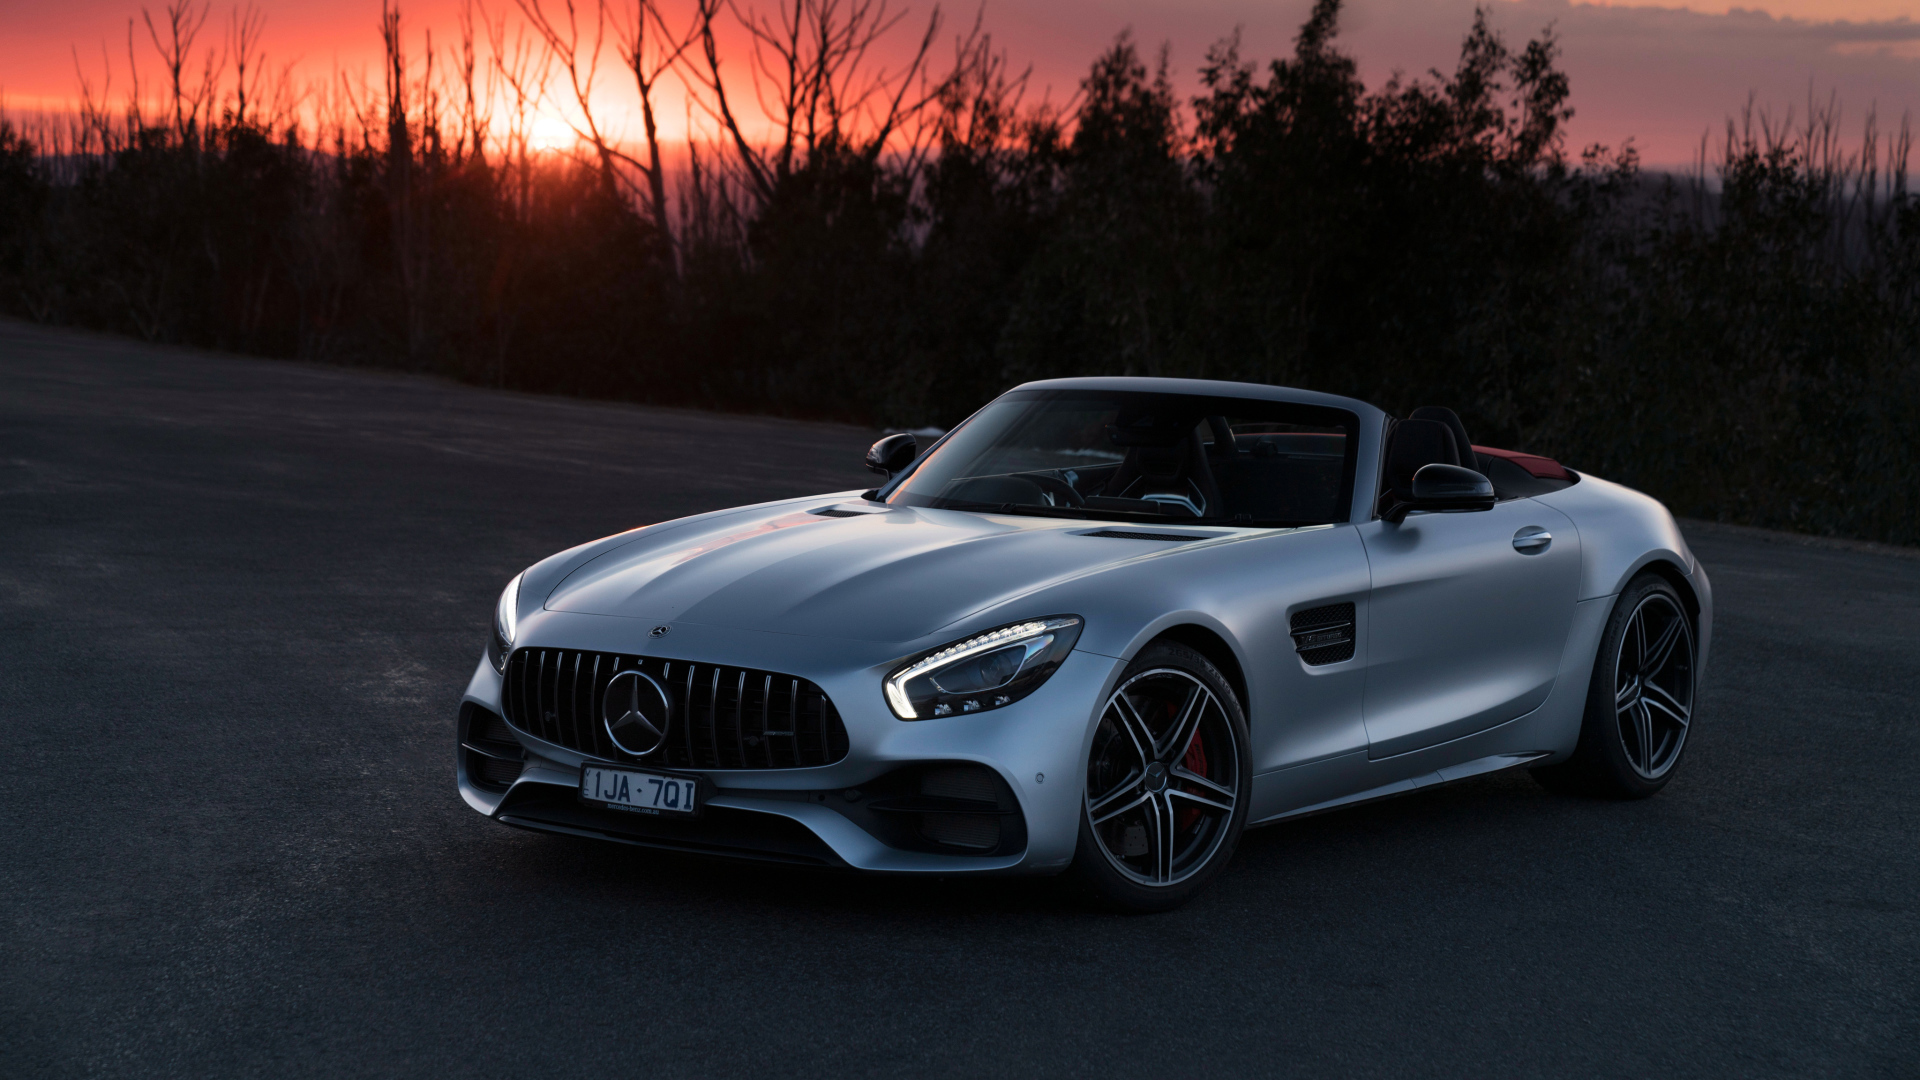 Silver Convertible Mercedes-AMG GT C Roadster, 2018 at sunset